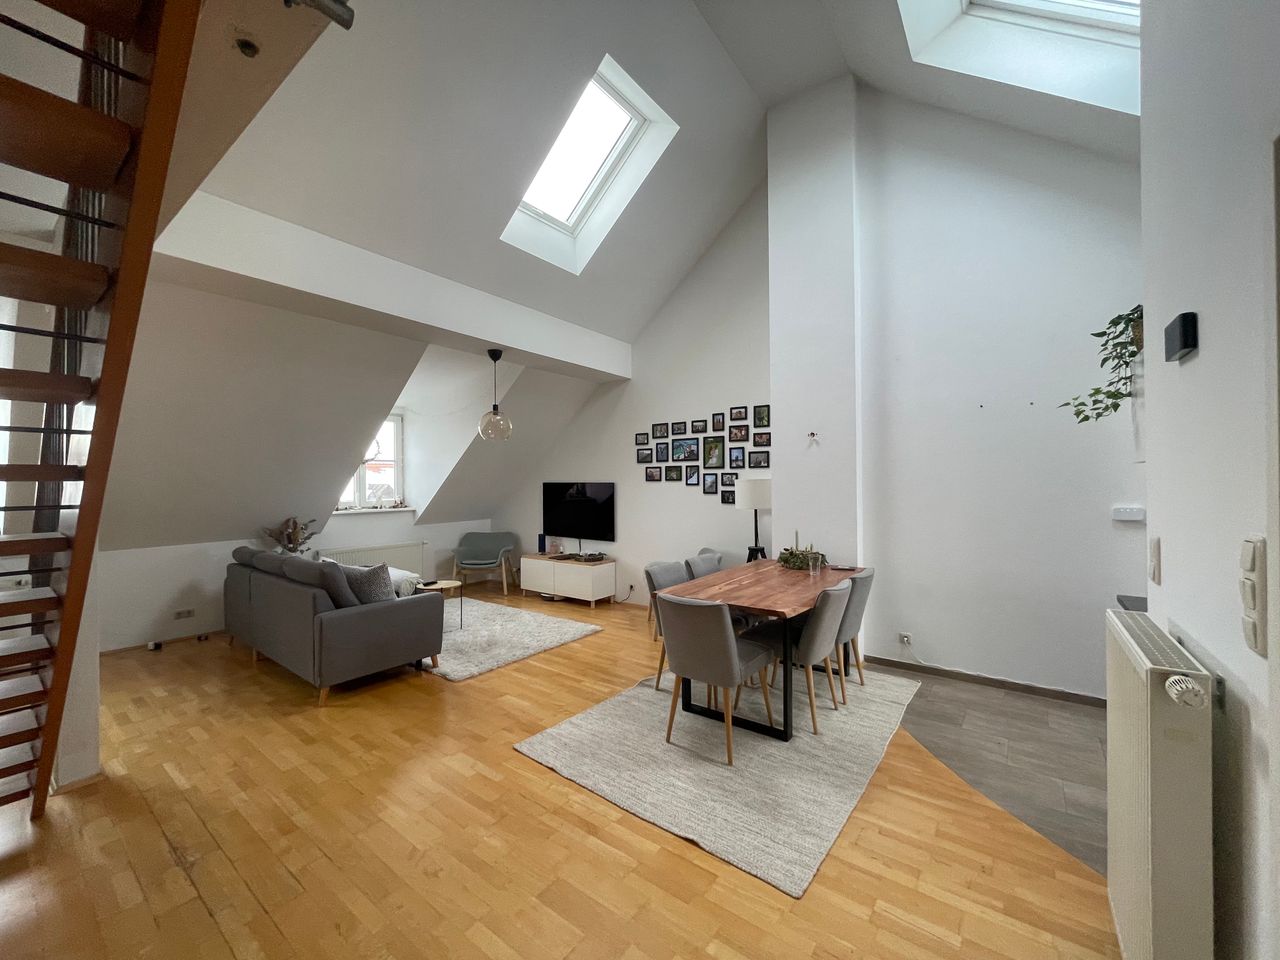 Exclusive Duplex Apartment with Modern Amenities in the Heart of Munich for Temporary Stay